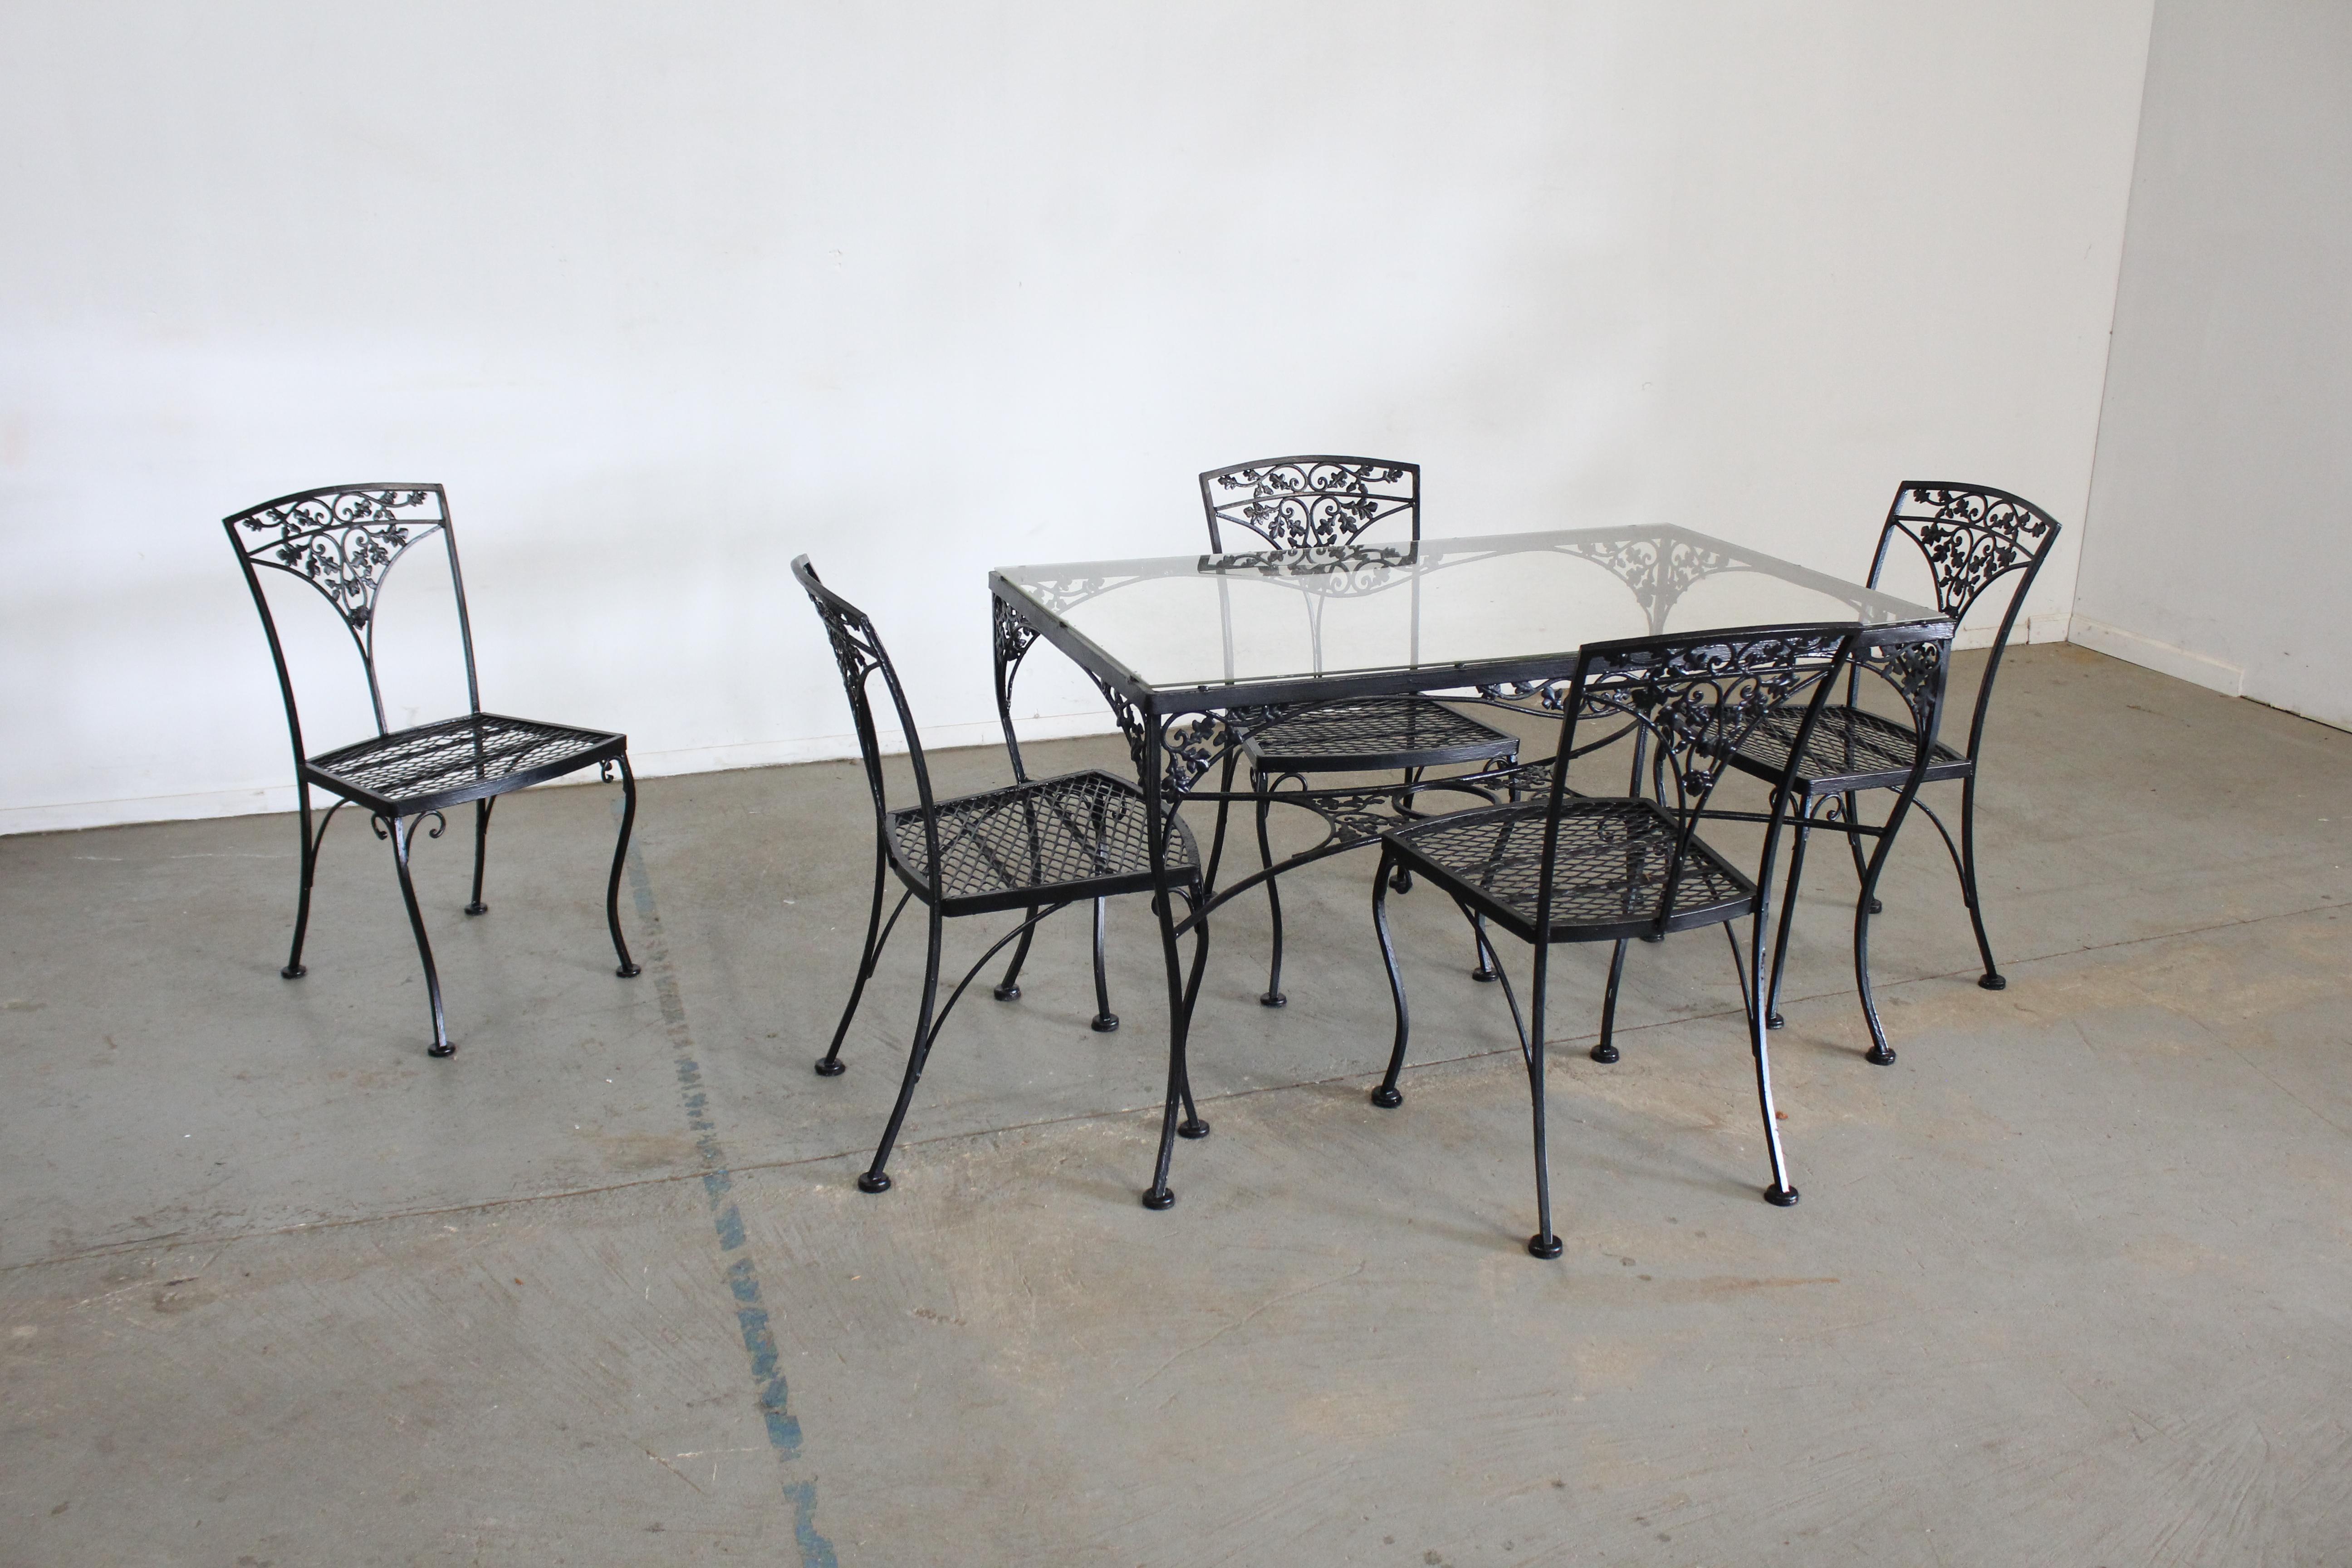 Vintage Heavy Iron Meadowcraft Outdoor Iron Table and 5 Chairs
Offered is a Vintage Heavy Iron Meadowcraft Outdoor Iron Table and 5 Chairs . A great set for tight spaces as the table is only 42